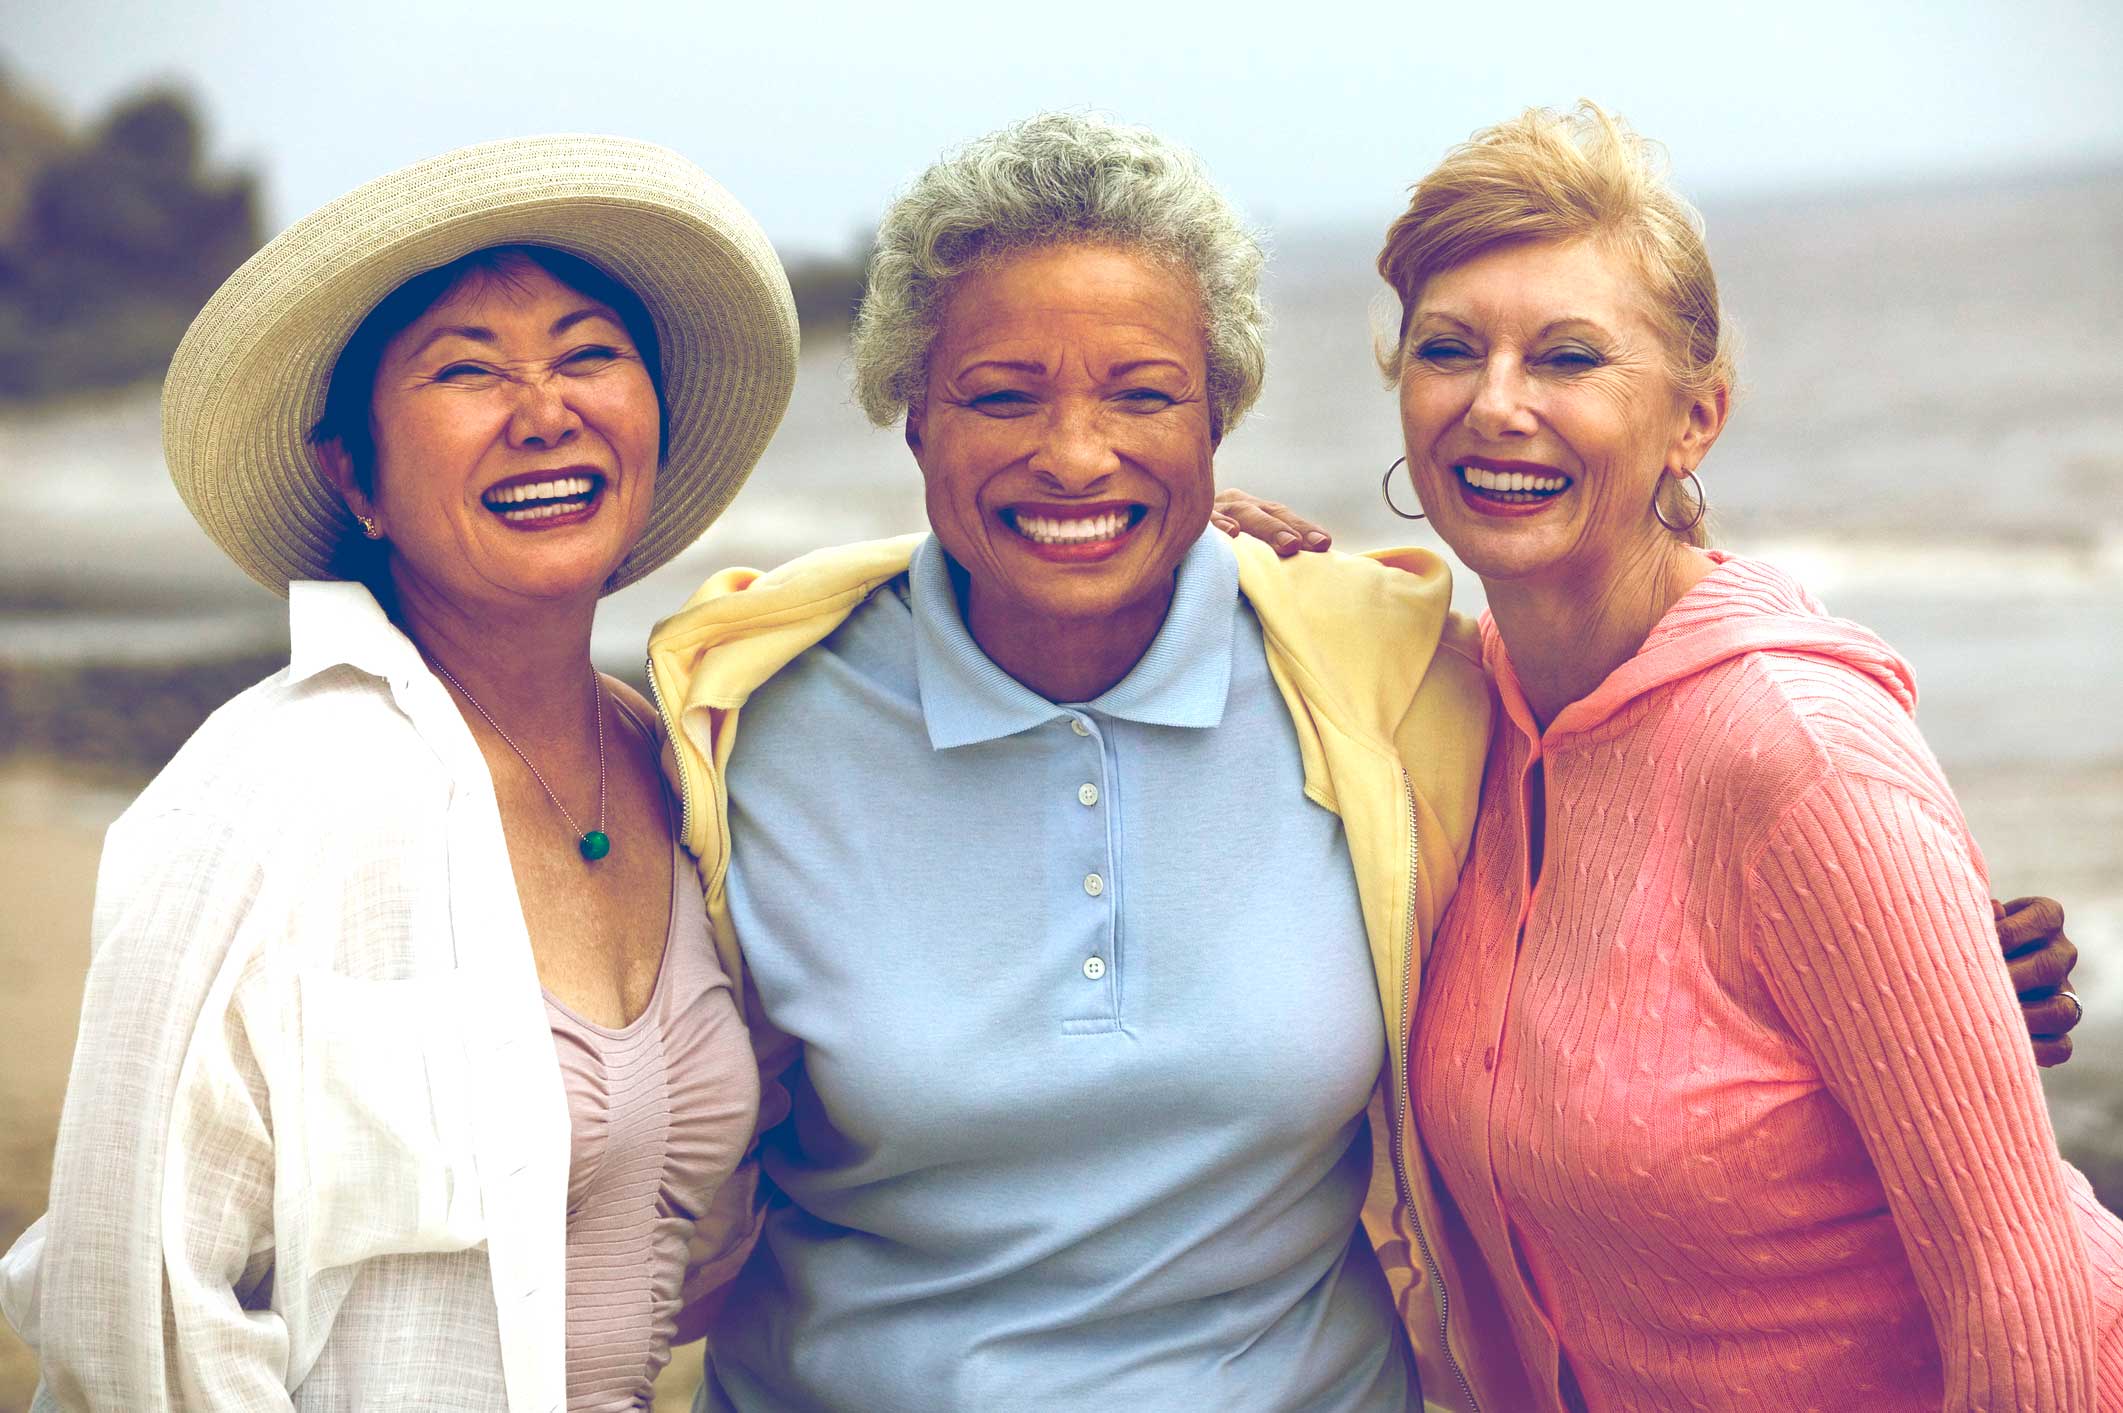 Three women wrapping their arms around each other laughing towards the camera